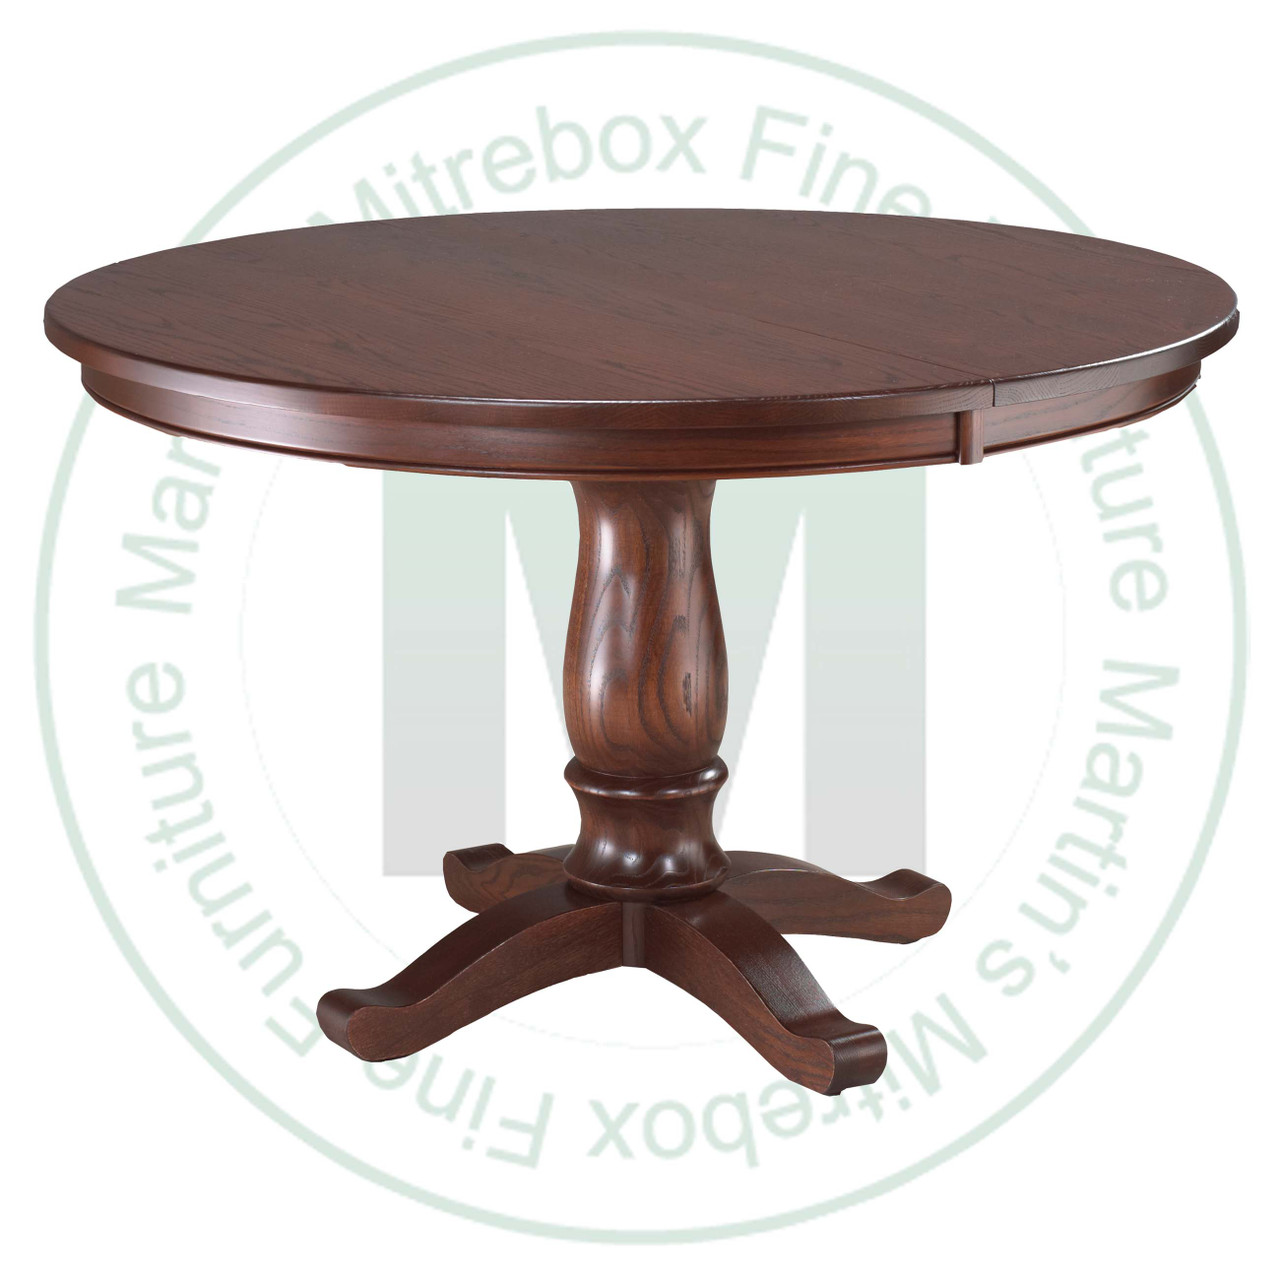 Oak Kimberly Crest Single Pedestal Table 54''D x 54''W x 30''H Round Solid Table